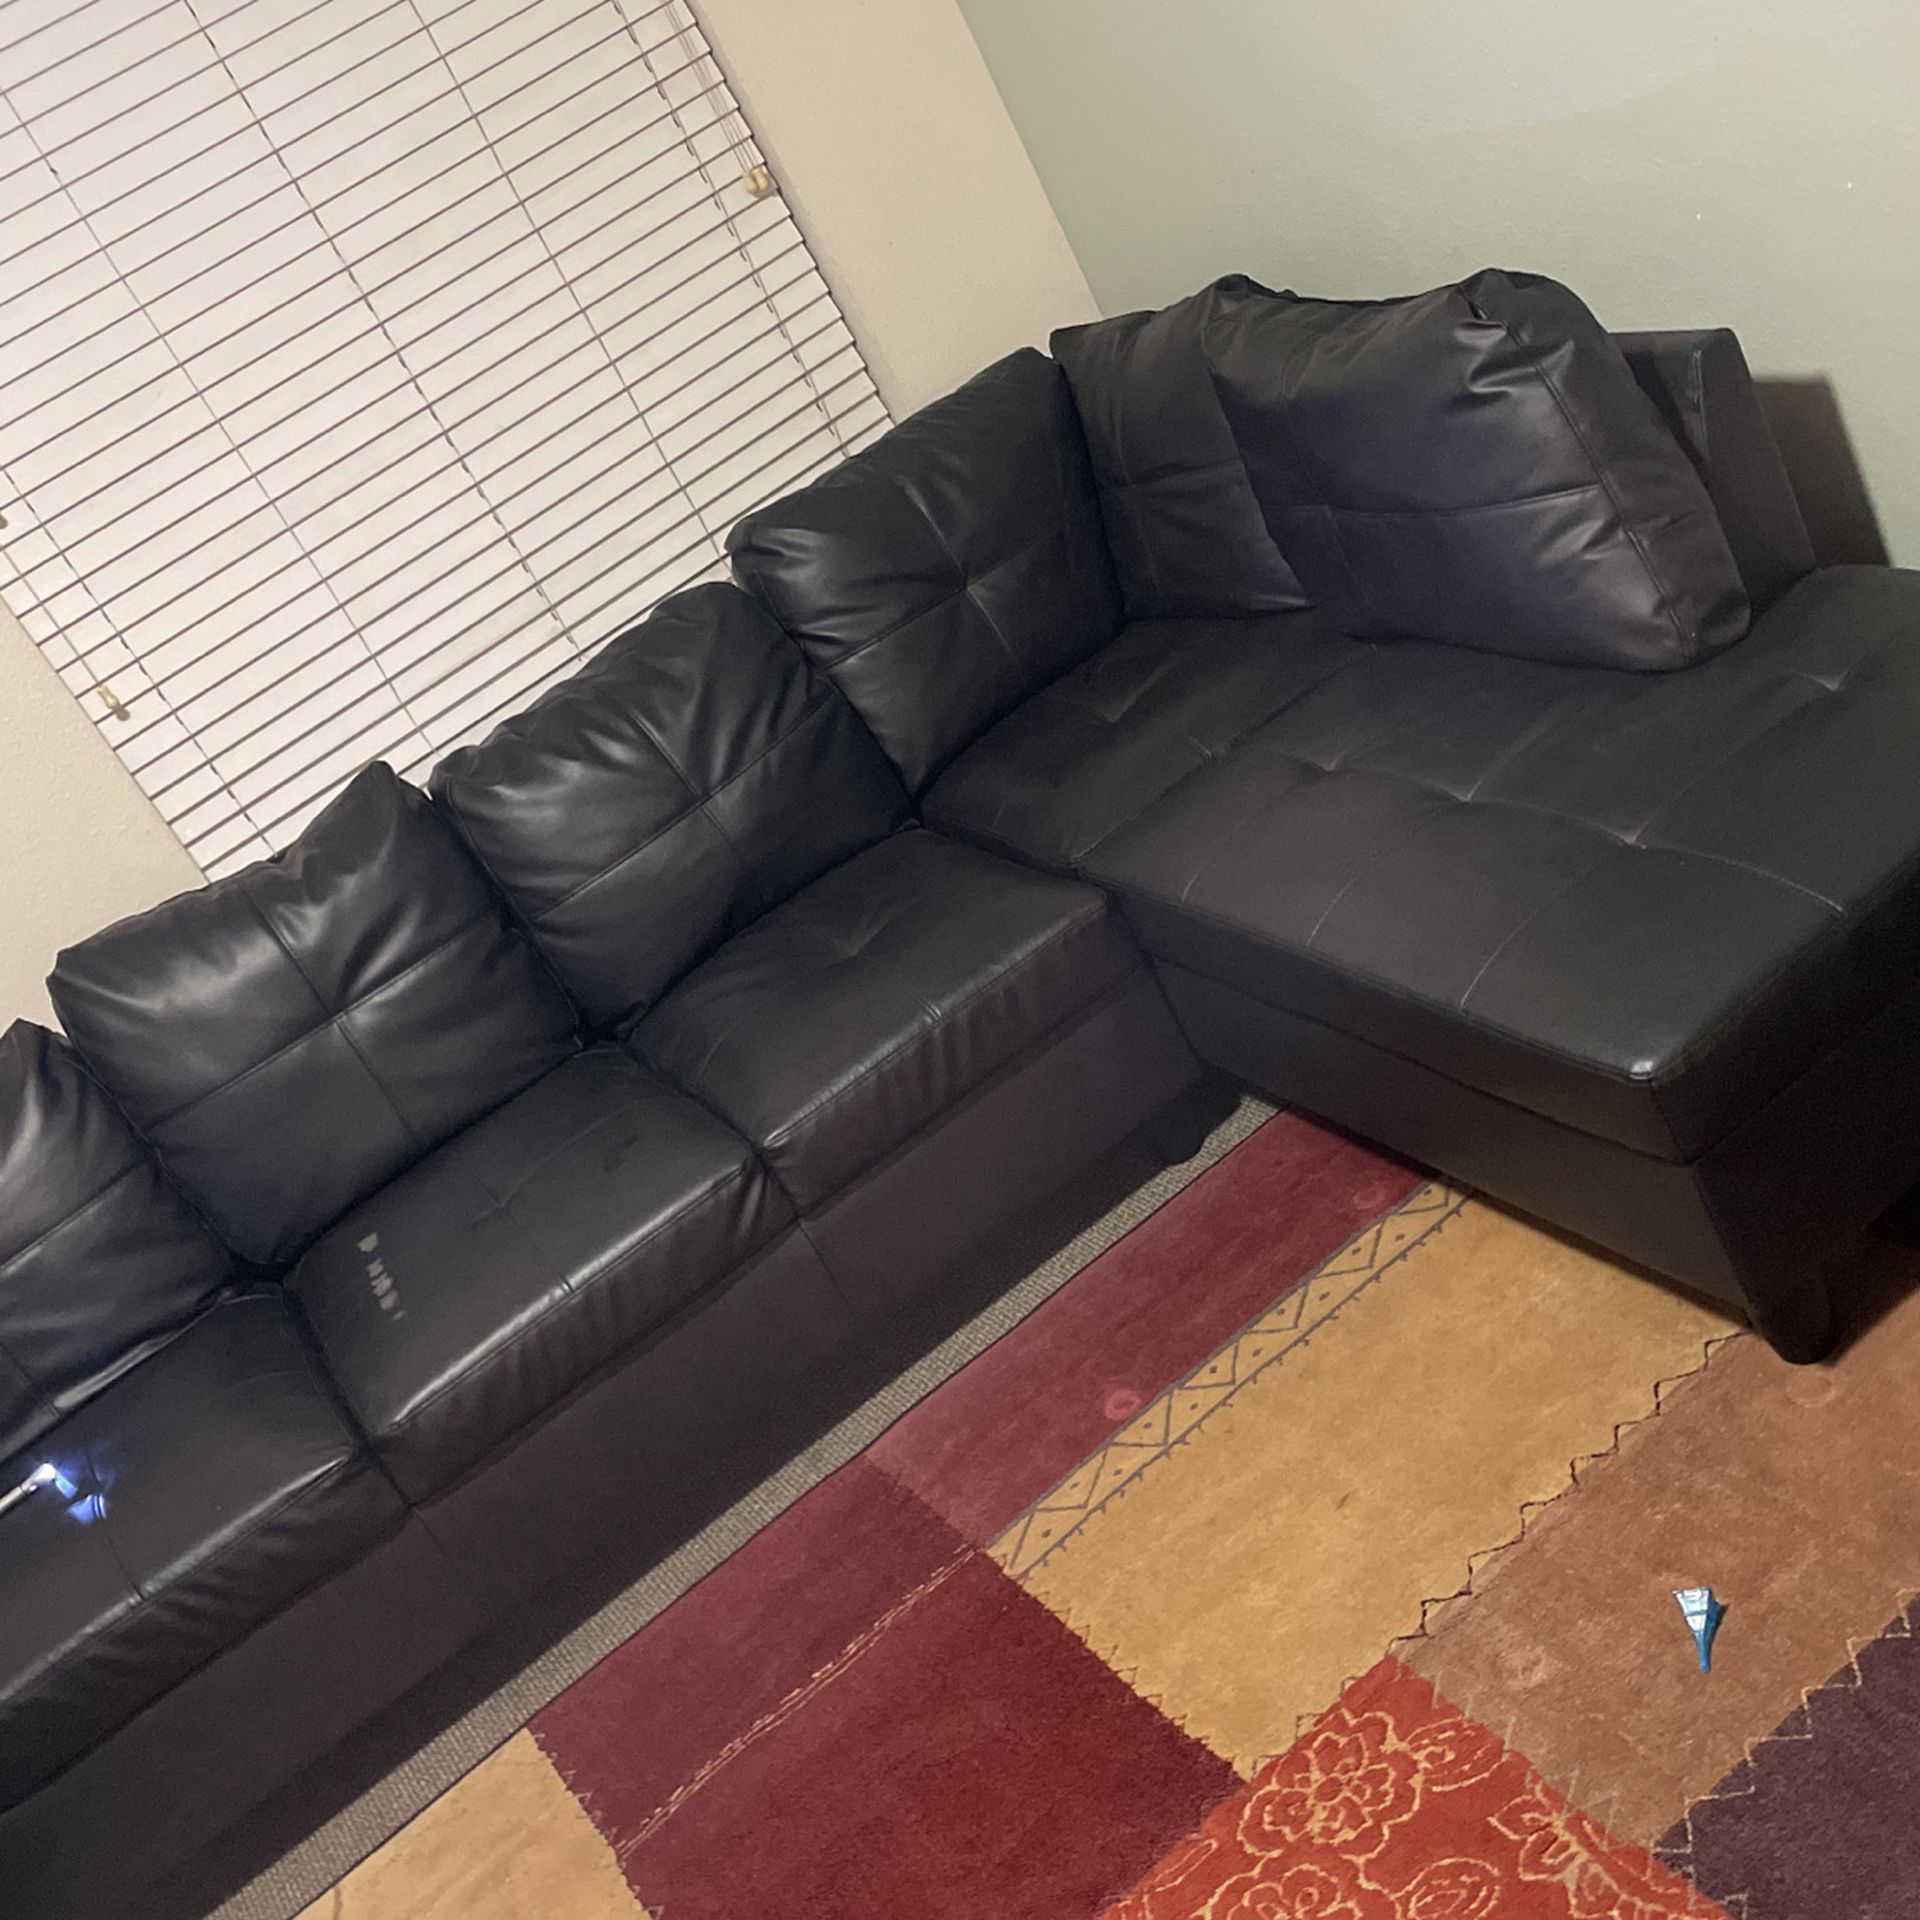 Used black faux leather couch - $80 : r/FullertonCollege